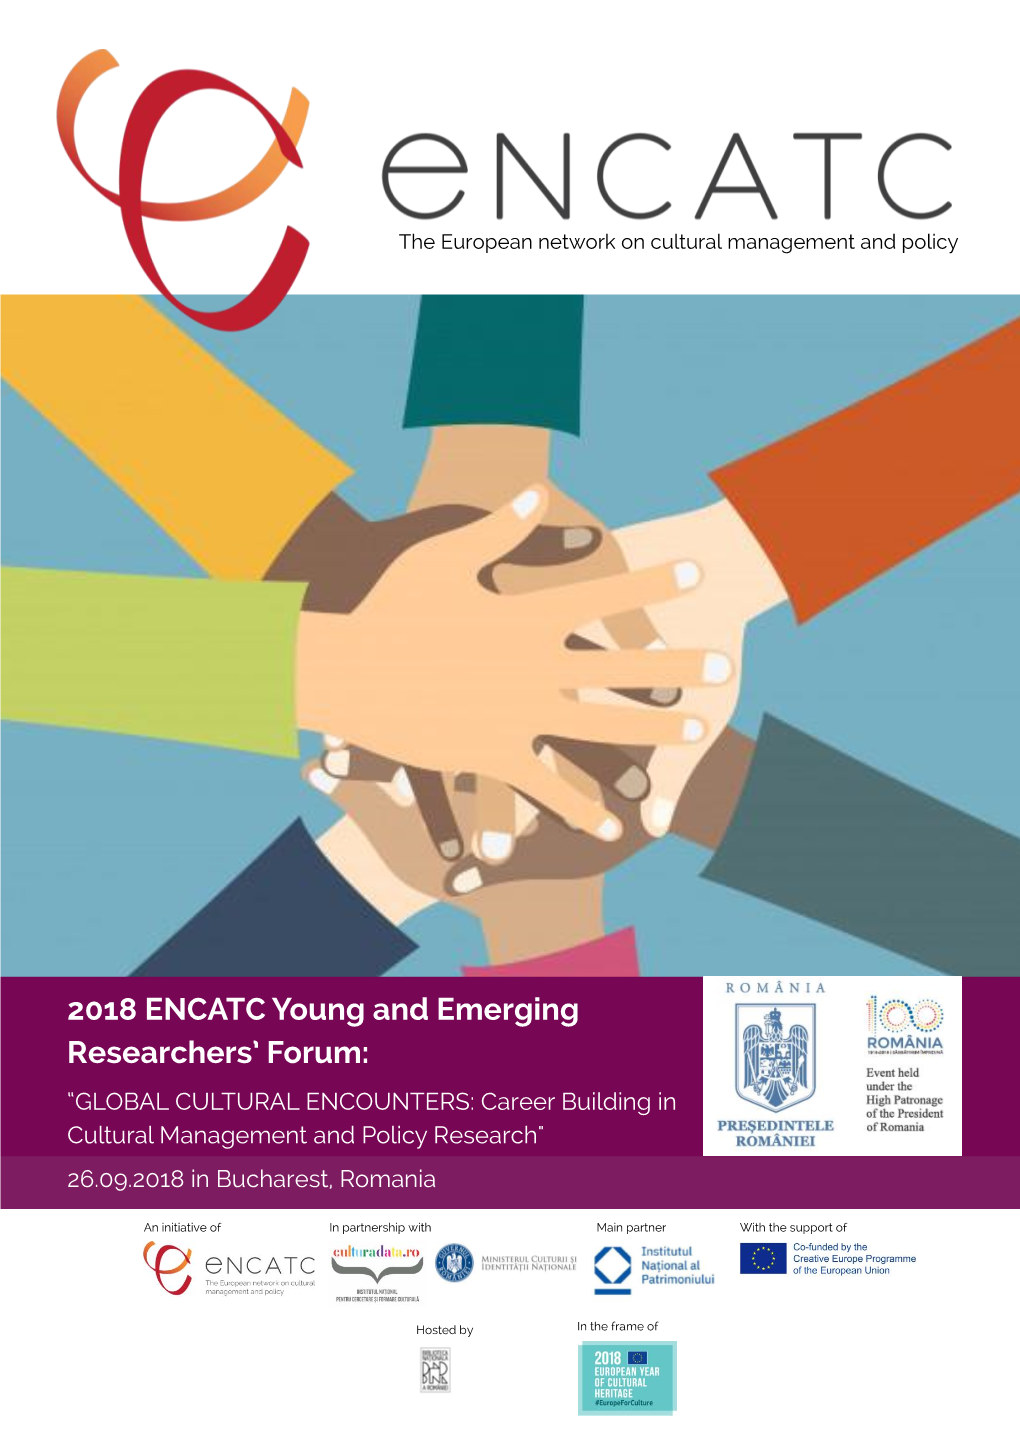 2018 ENCATC Young and Emerging Researchers' Forum